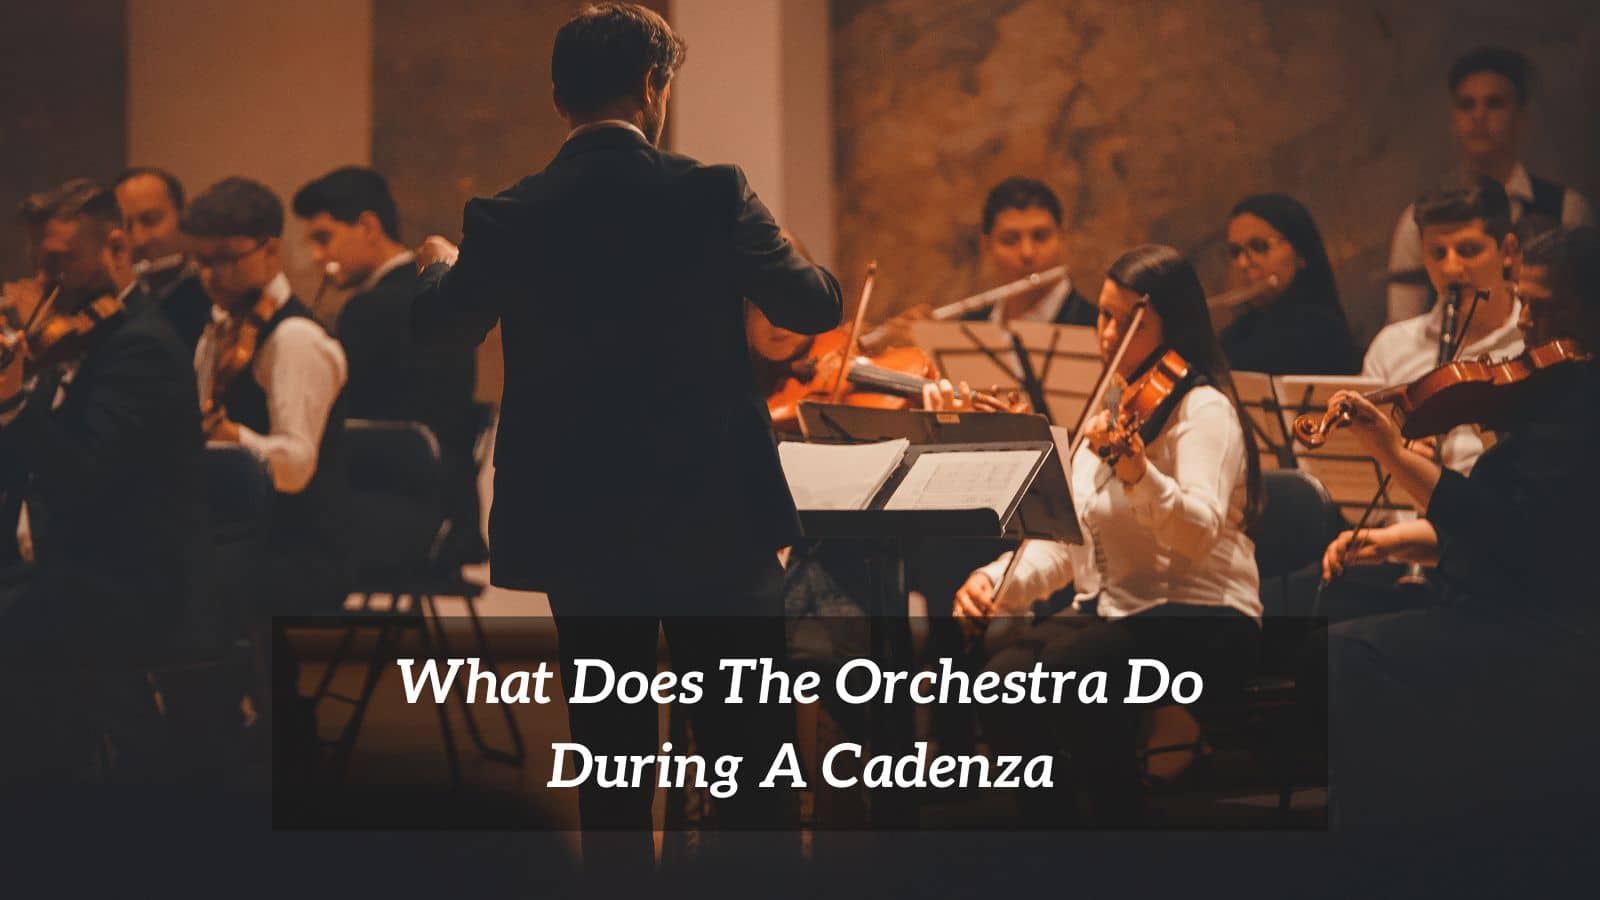 What Does The Orchestra Do During A Cadenza